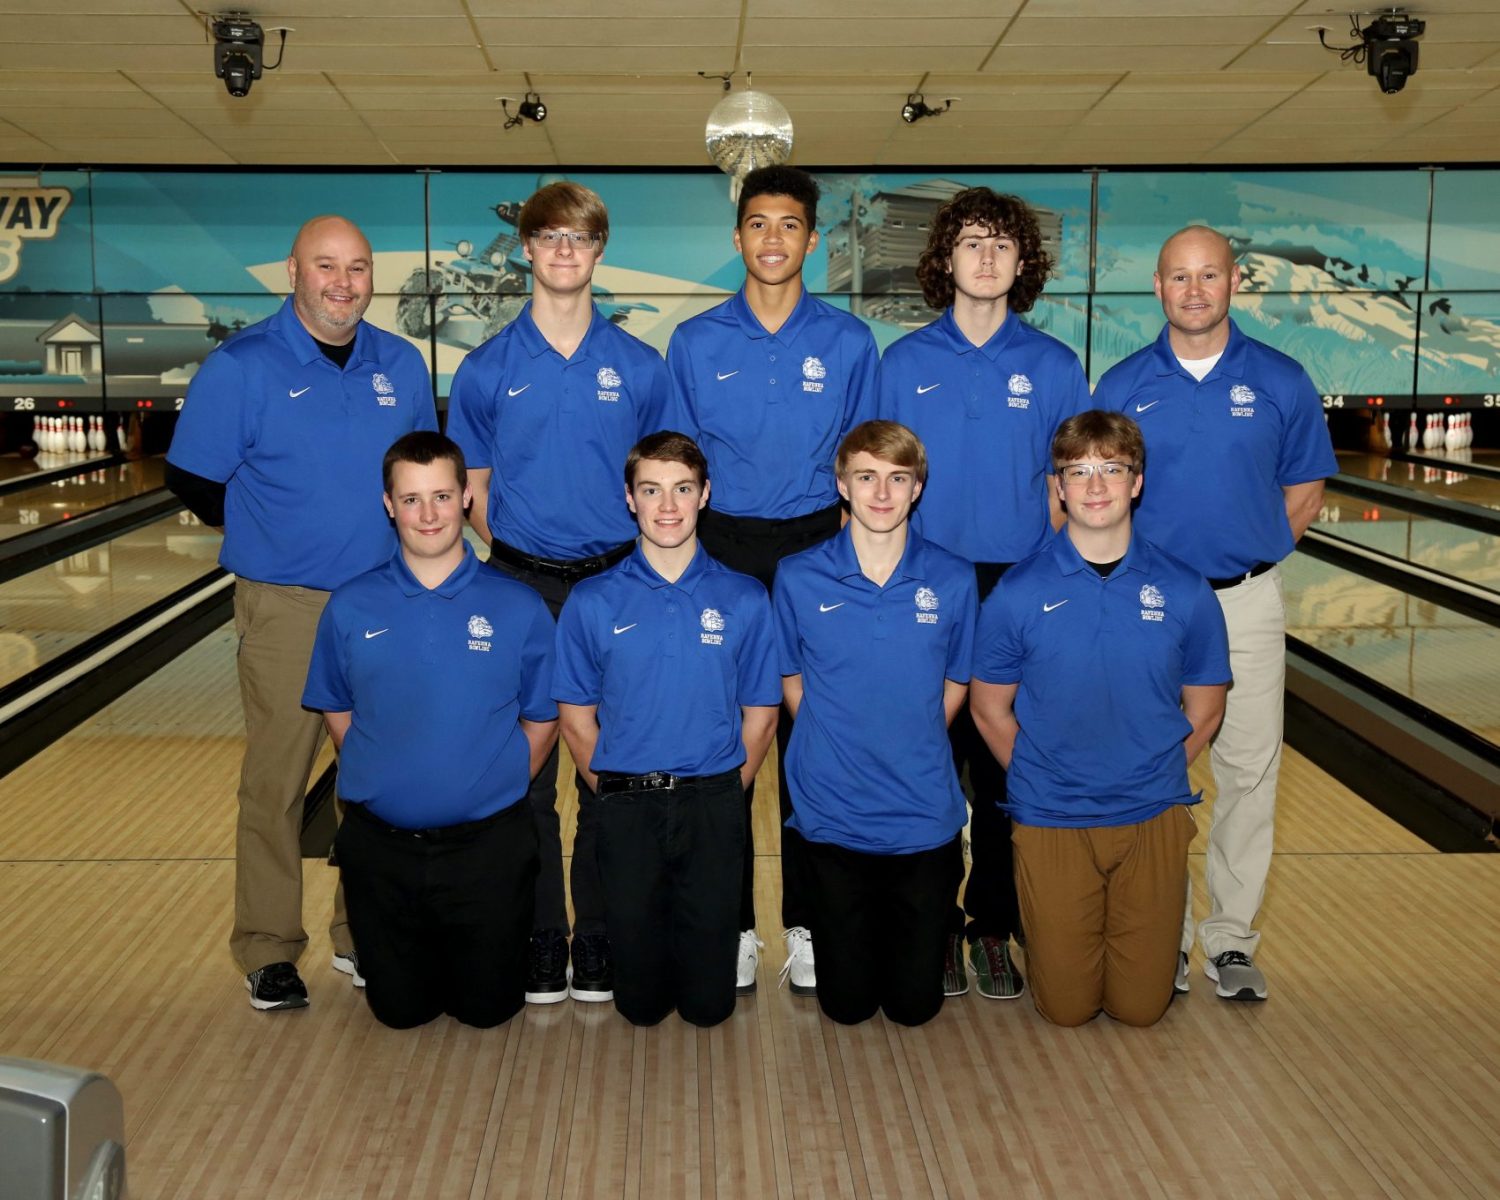 Ravenna sweeps Ludington in Wednesday bowling action